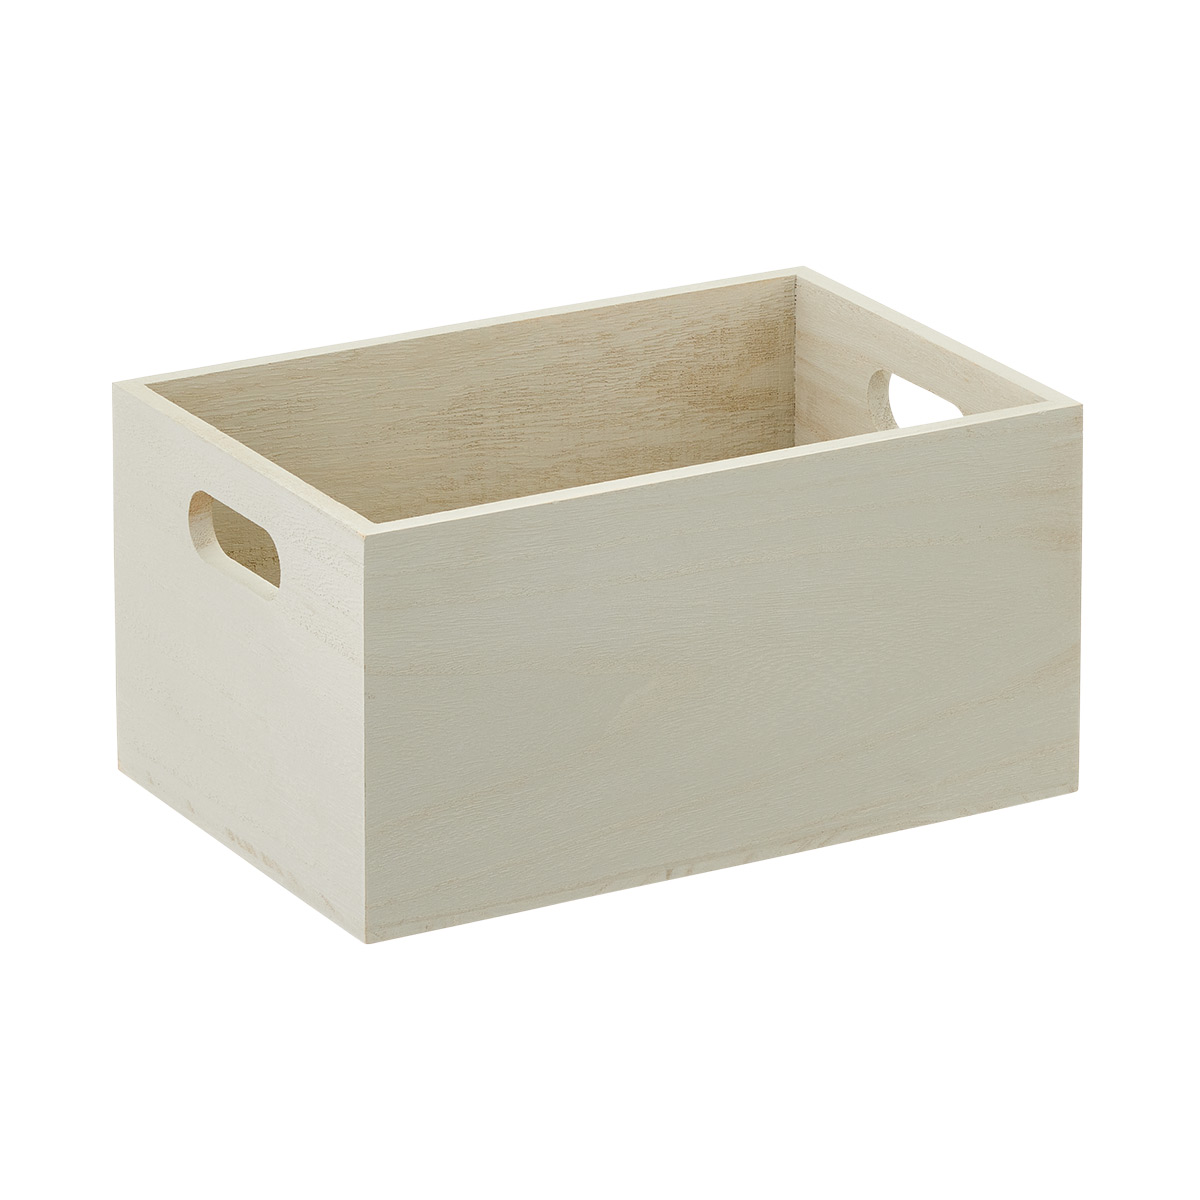 https://www.containerstore.com/catalogimages/439305/10055898_X-Small_Brentwood_Bin_White.jpg